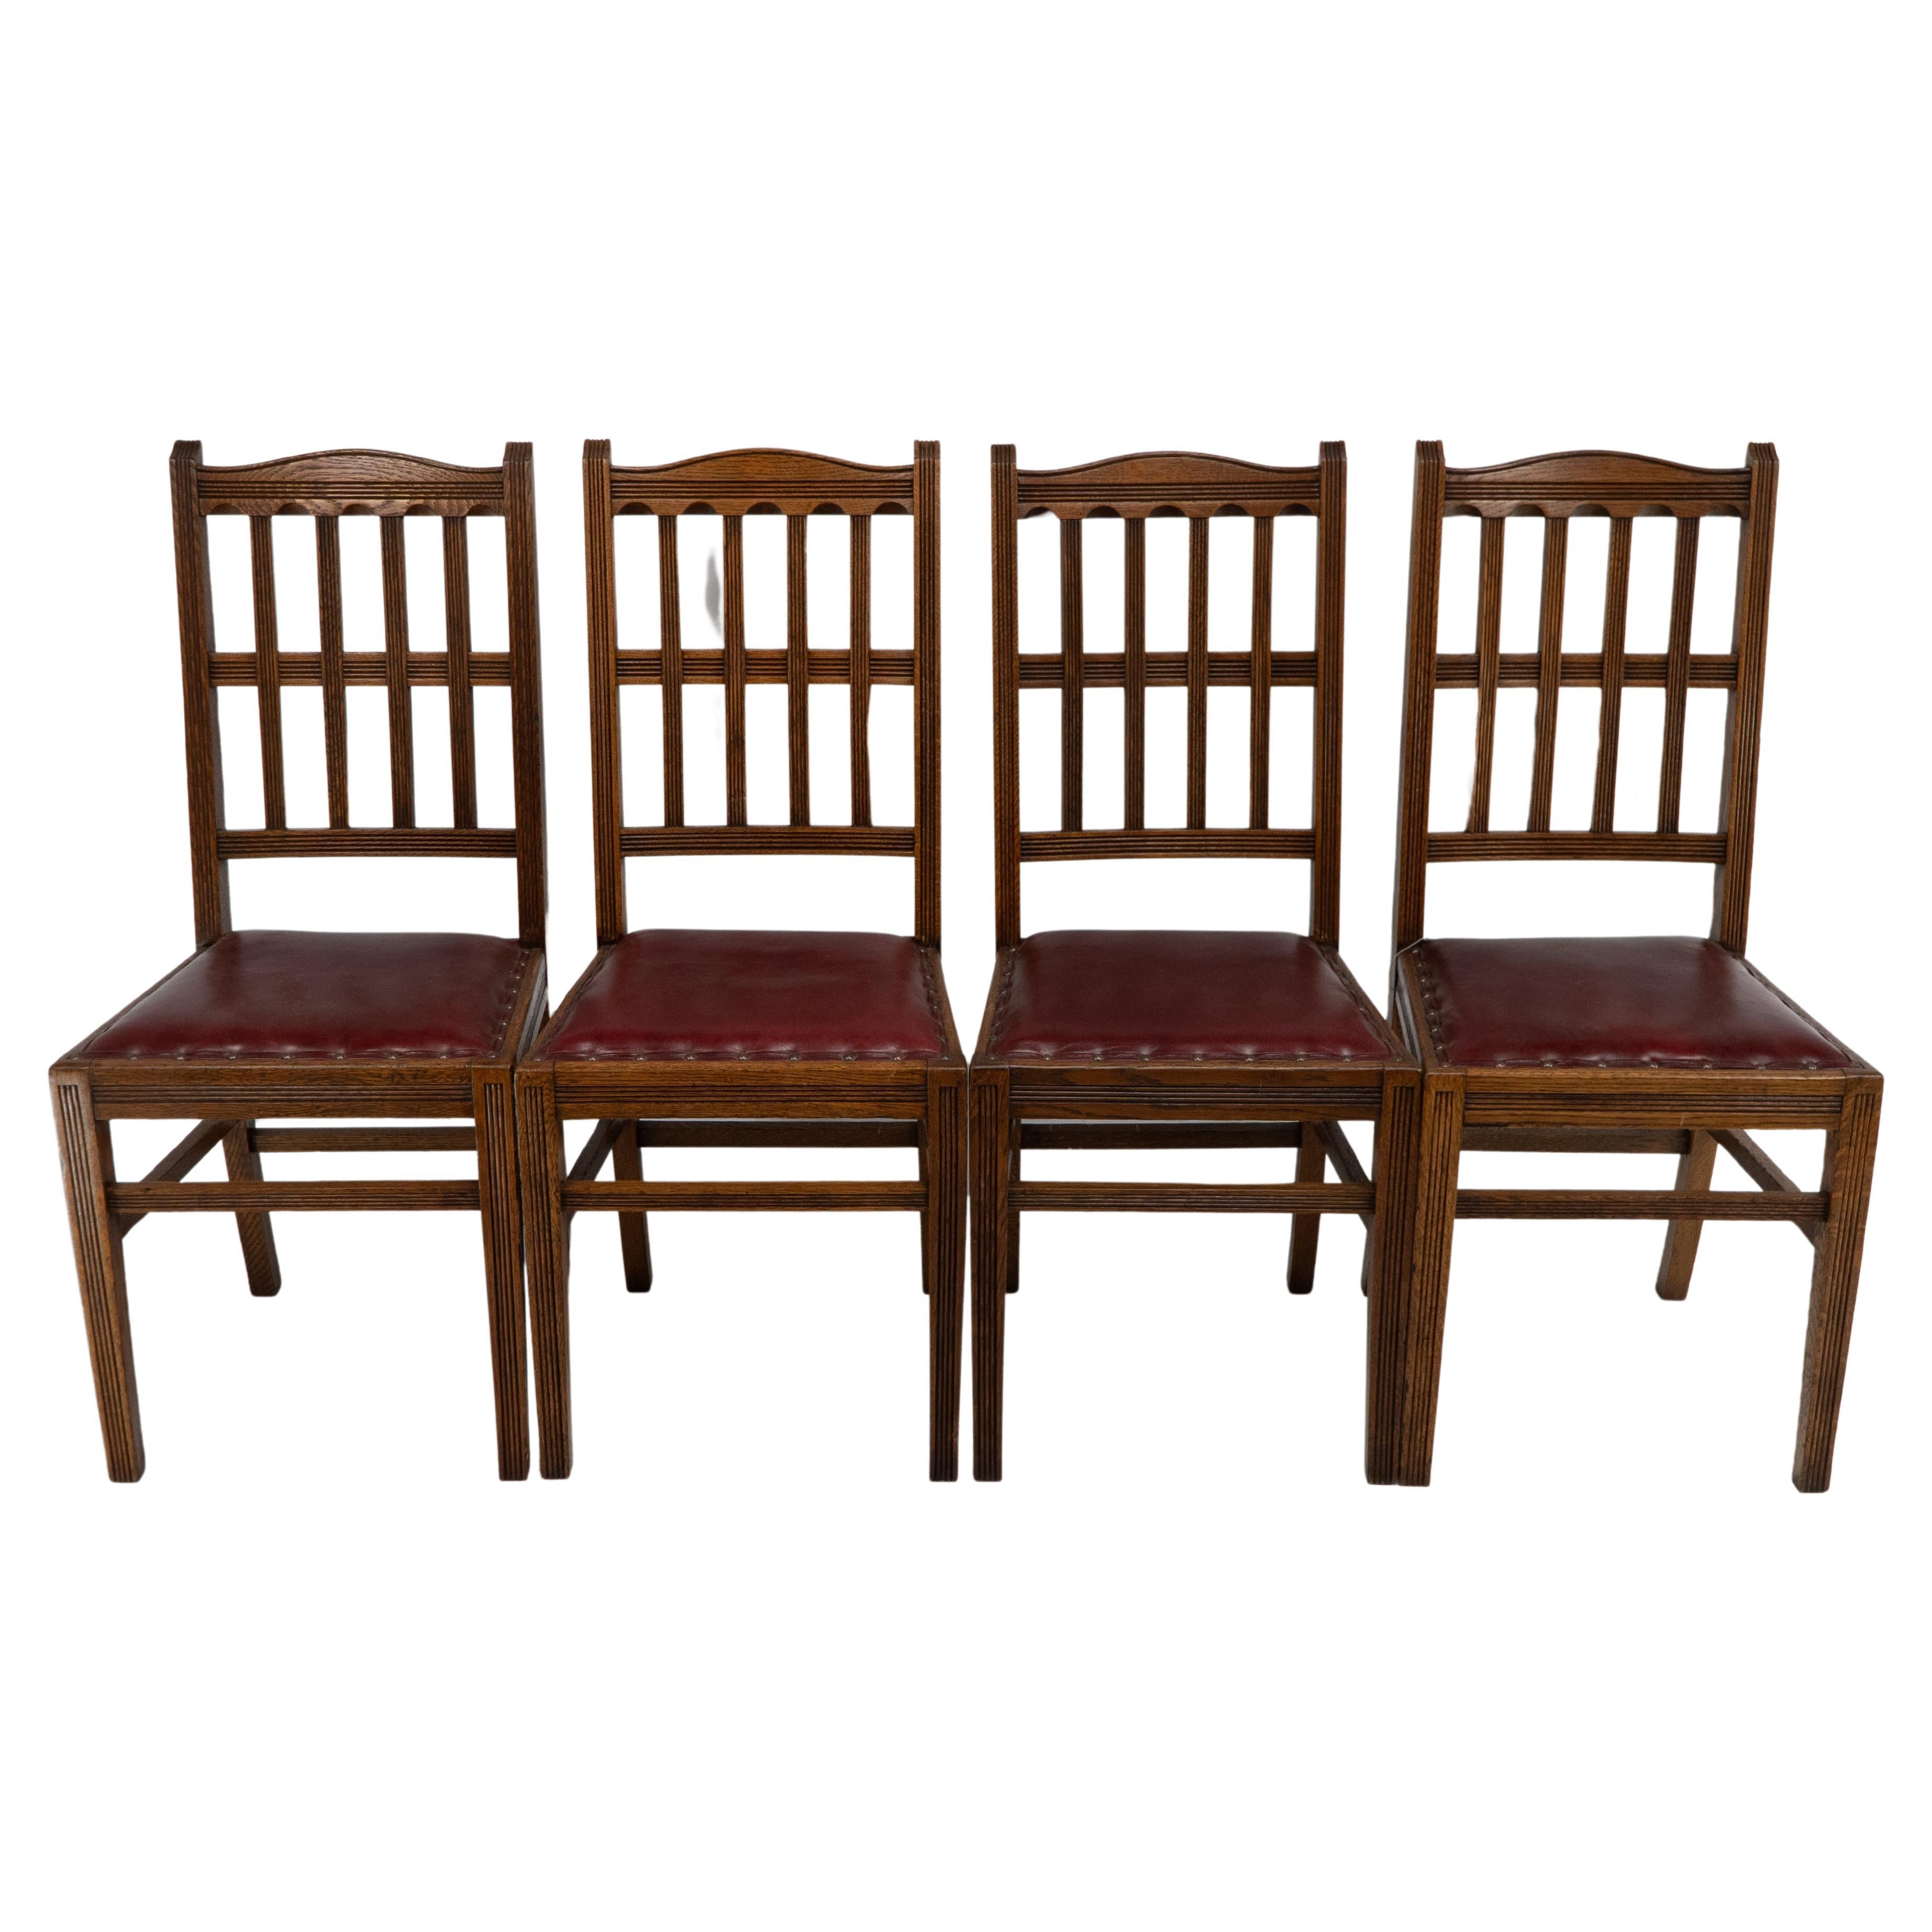 Jas Shoolbred. A set of four Aesthetic Movement lattice back oak dining chairs.